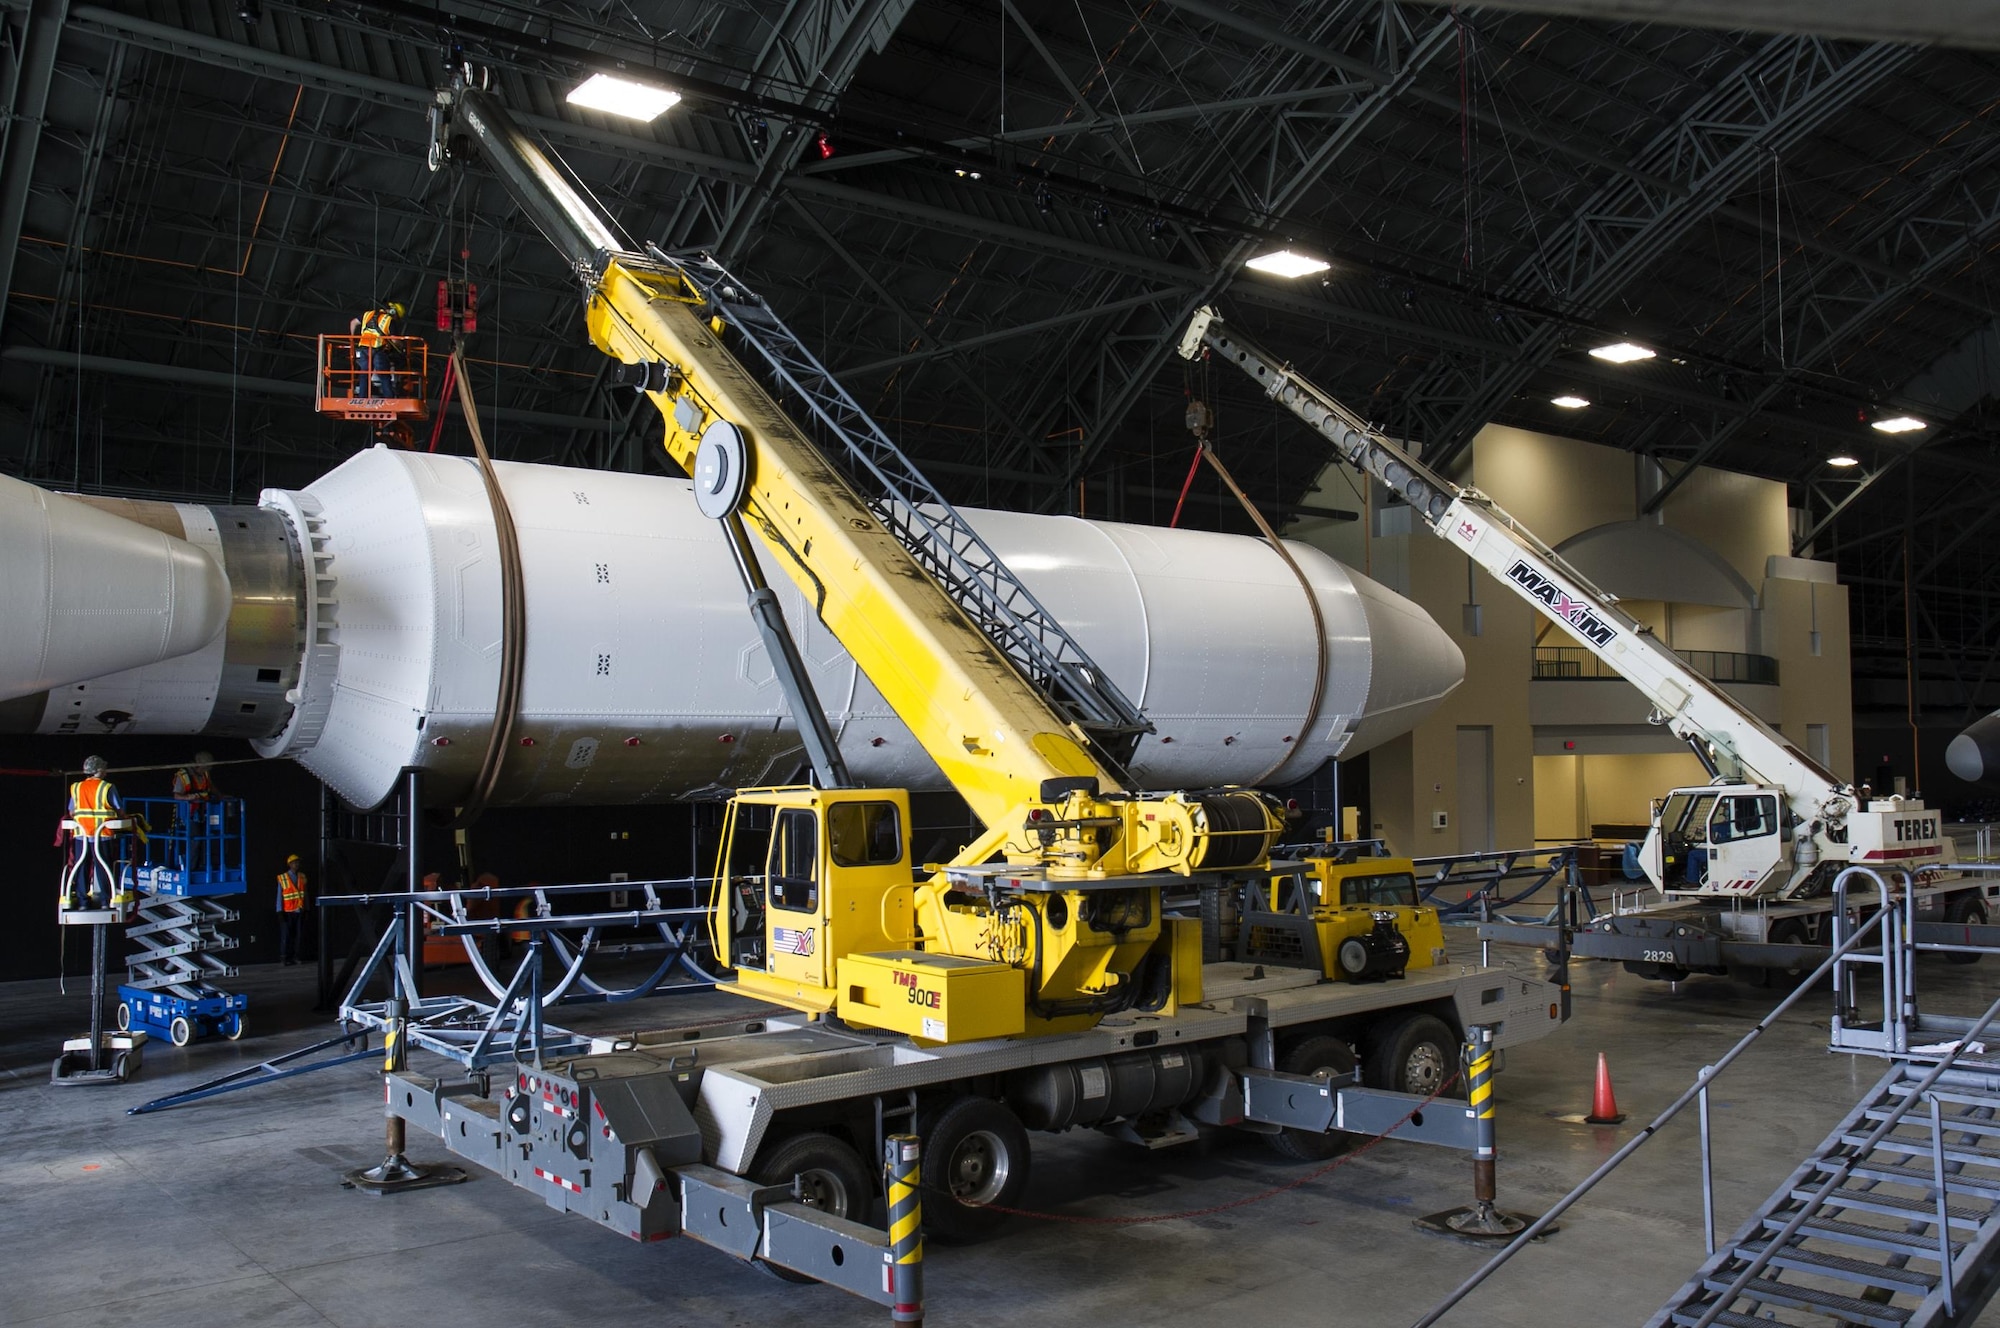 DAYTON, Ohio - Titan IVB stage two, and the payload fairing were both raised into their final position from 12-13 May, 2016. Maxim Crane Works and museum restoration crews worked together using two lifts to place the final
sections onto the stand. The impressive Titan IVB, with roots going back to the early days of U.S. Air Force and civil space launch, is significant as the museum looks to share the story of USAF and USAF-enabled space operations in its Space Gallery. The Titan IVB will be on display in the new fourth building at the National Museum of the U.S. Air Force which opens to the public on June 8. (U.S. Air Force photo by Ken LaRock)
